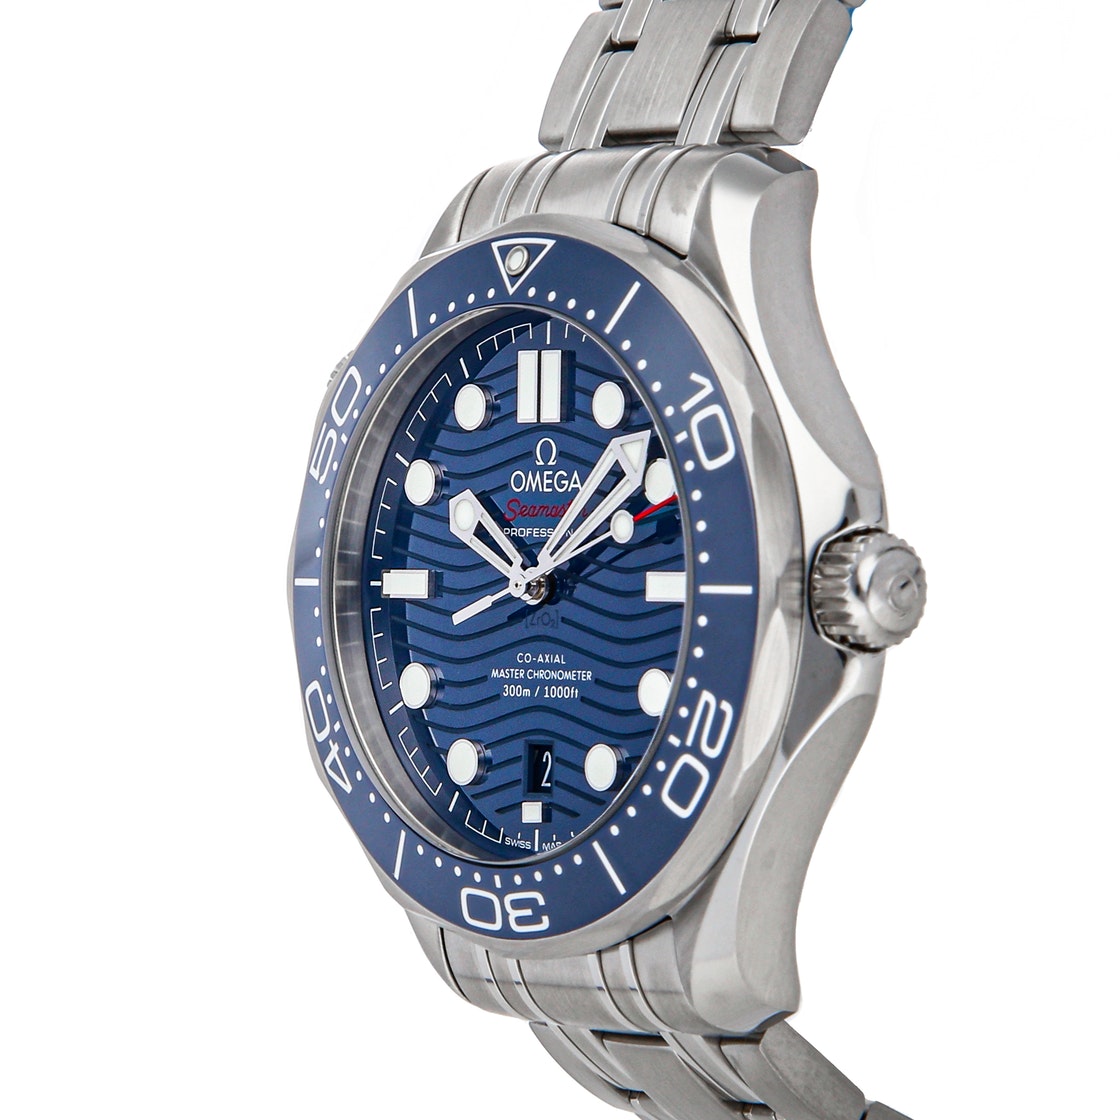 

Omega Blue Stainless Steel Seamaster Diver 300m 210.30.42.20.03.001 Men's Wristwatch 42 MM